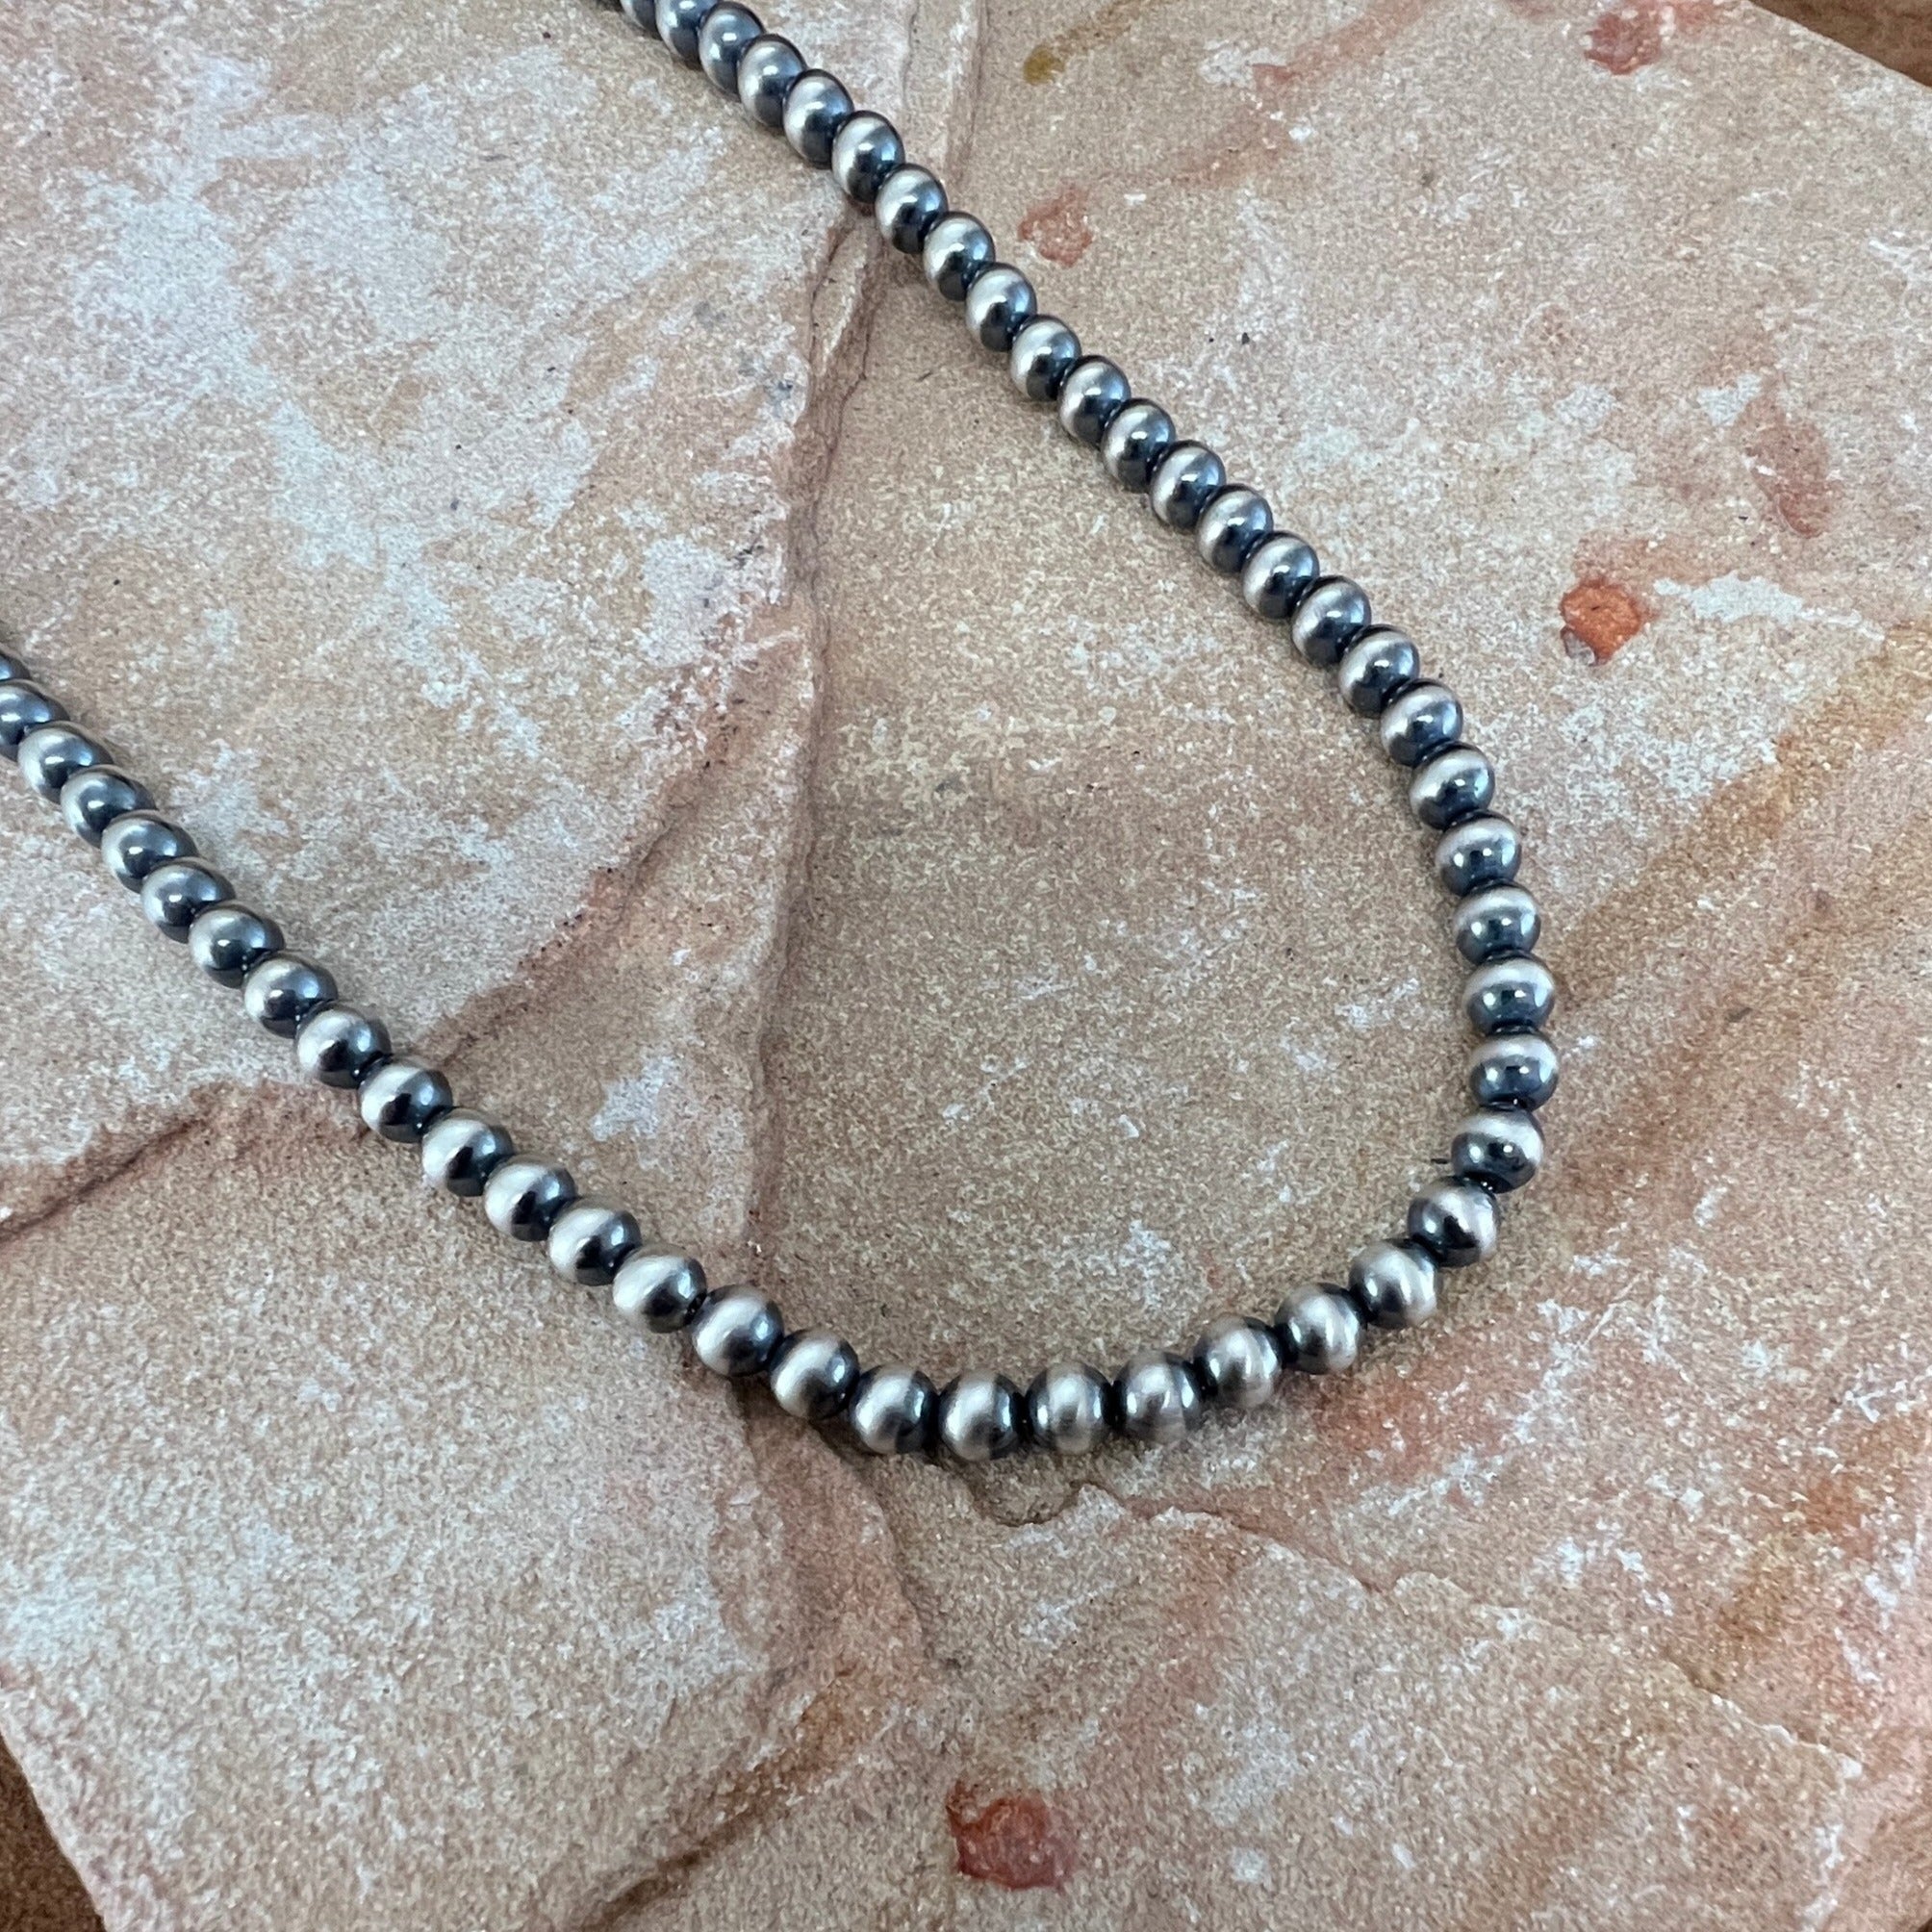 22 Single Strand Oxidized Sterling Silver Beaded Necklace 6 mm